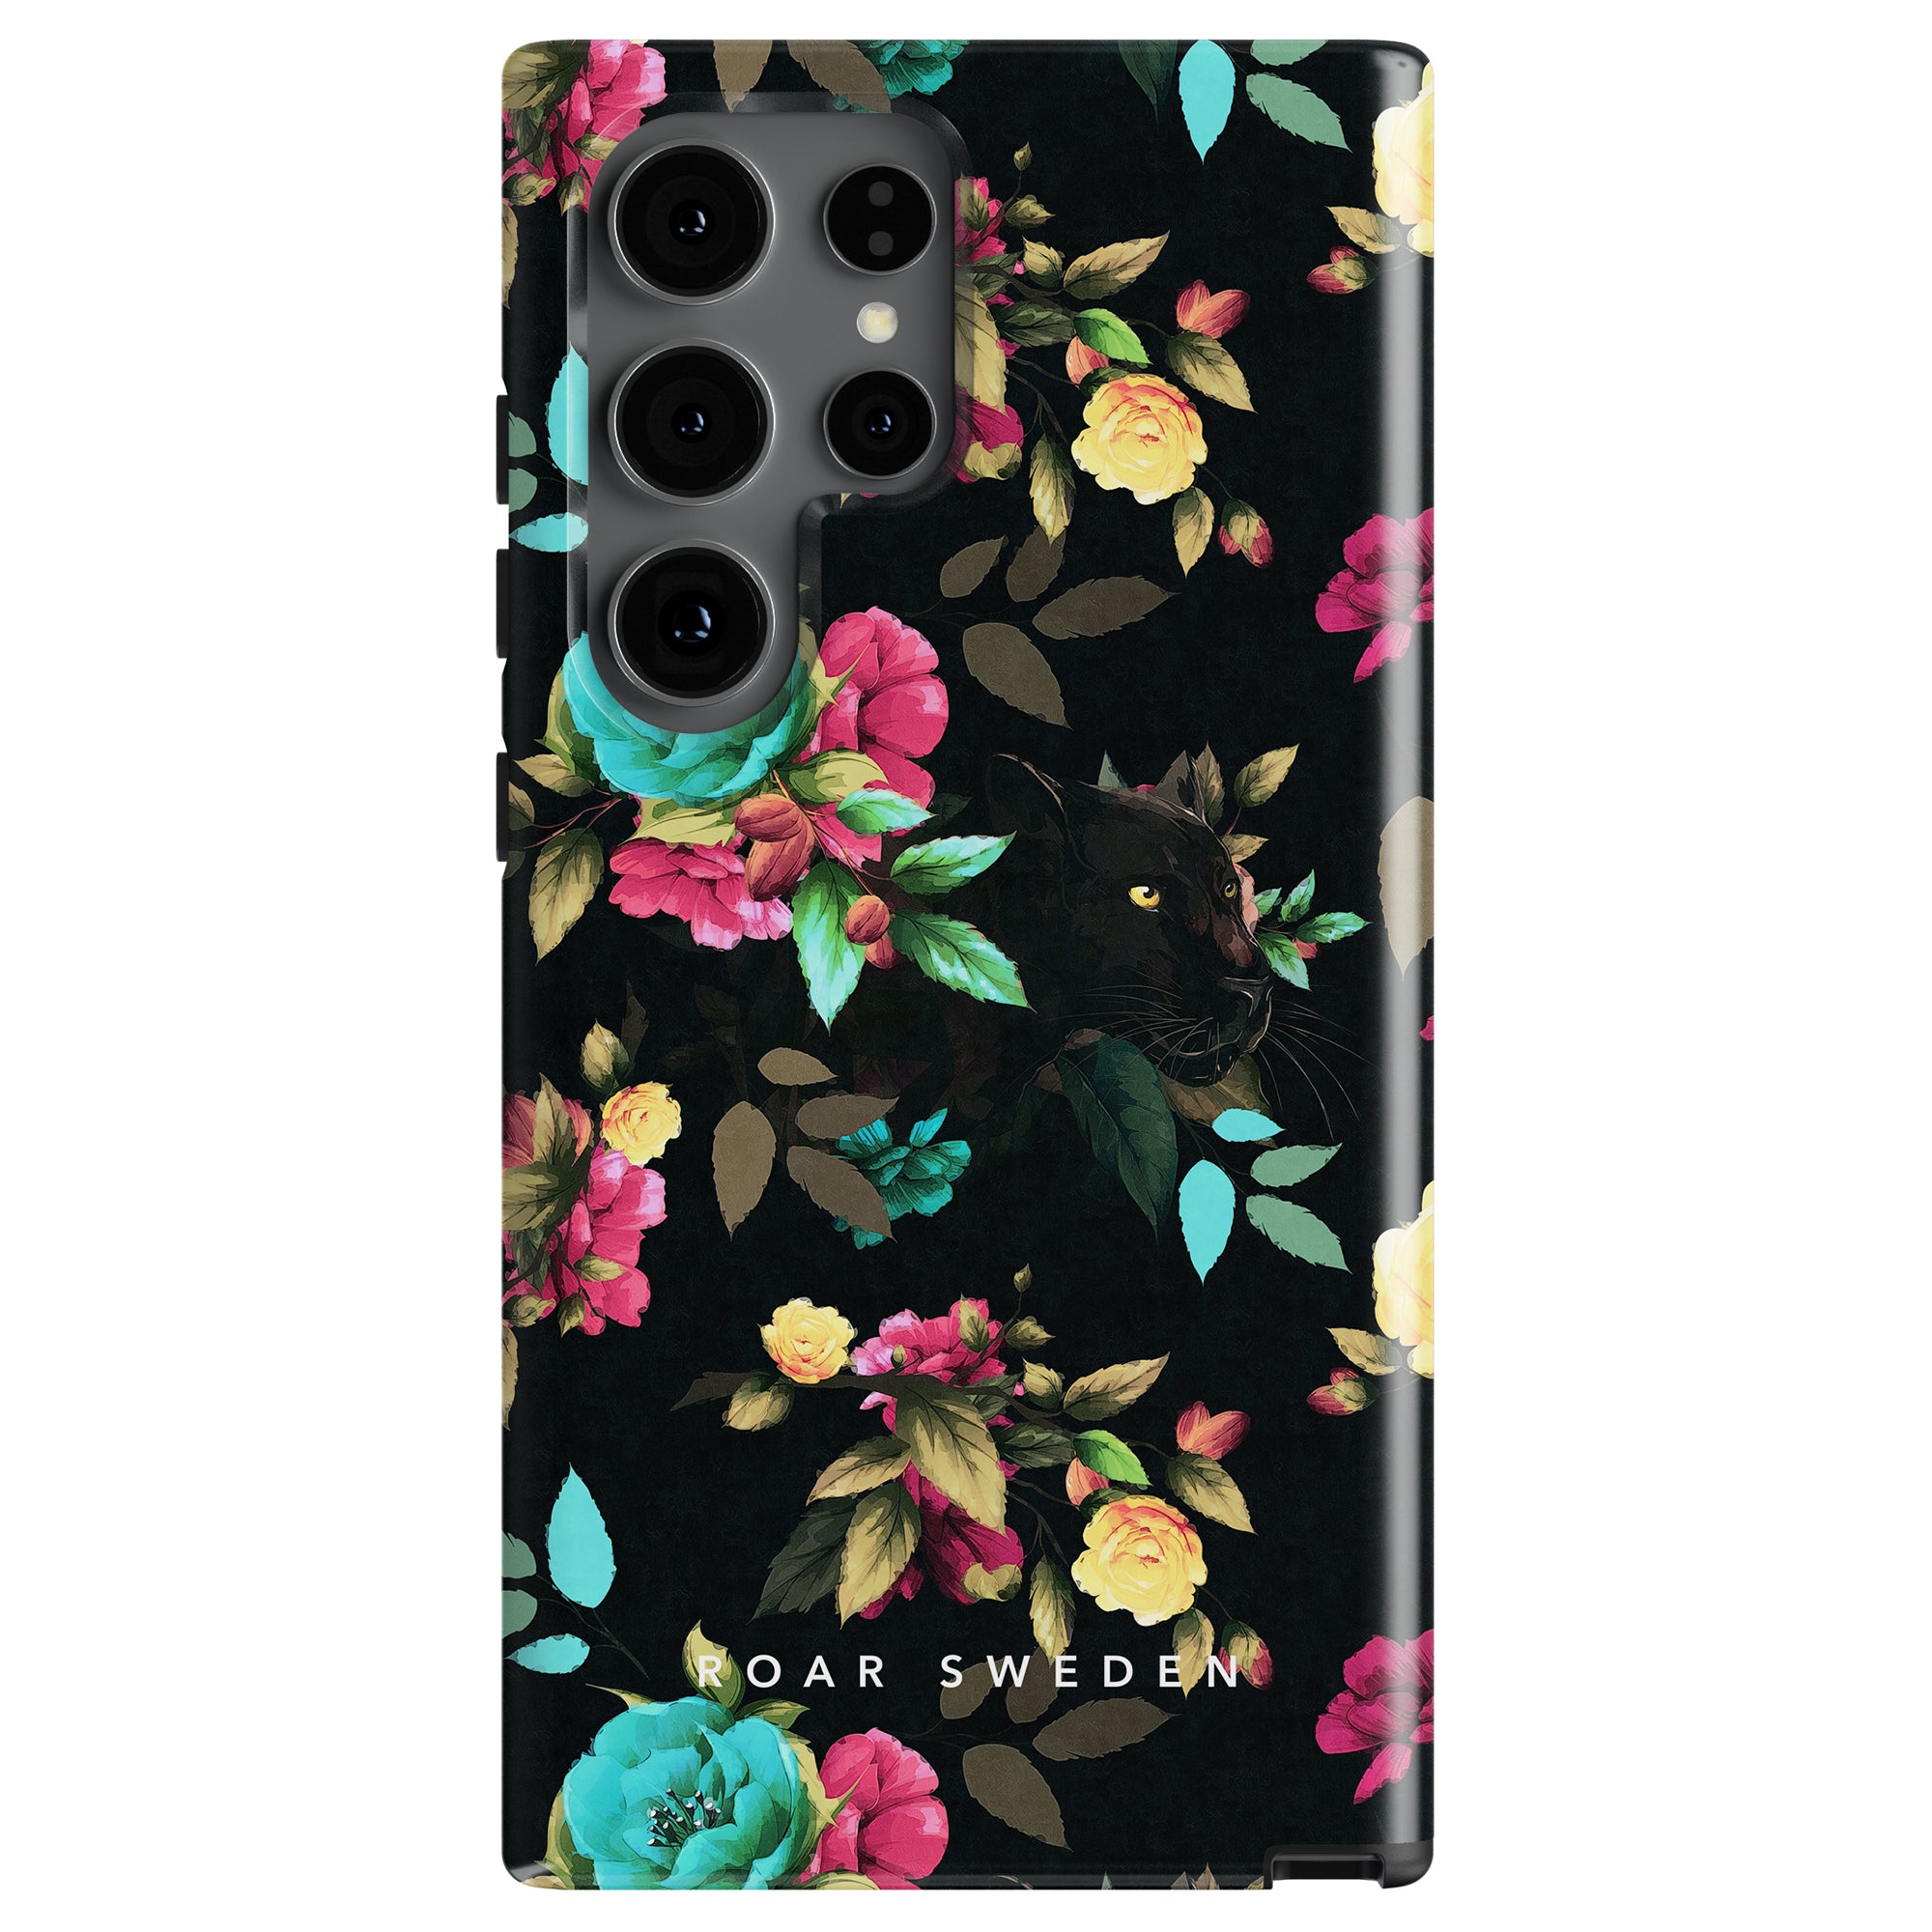 Bloom Panther - Tough Case tough case with floral pattern and a black cat design, featuring cutouts for camera lenses, branded "roar sweden.